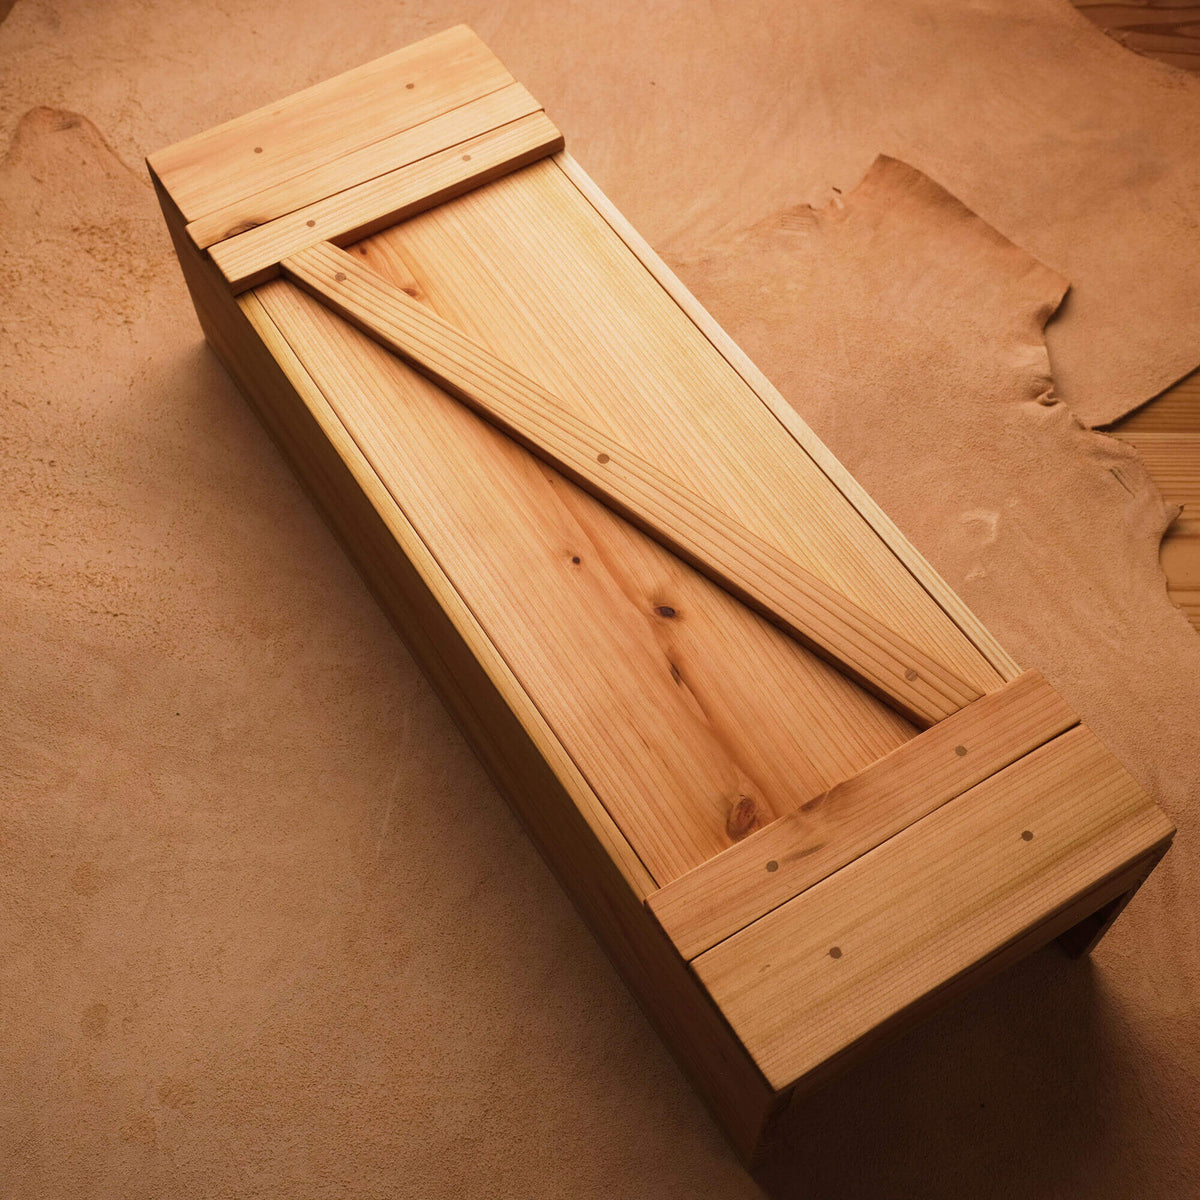 Build a Traditional Japanese Wooden Toolbox – Japanese Tools Australia